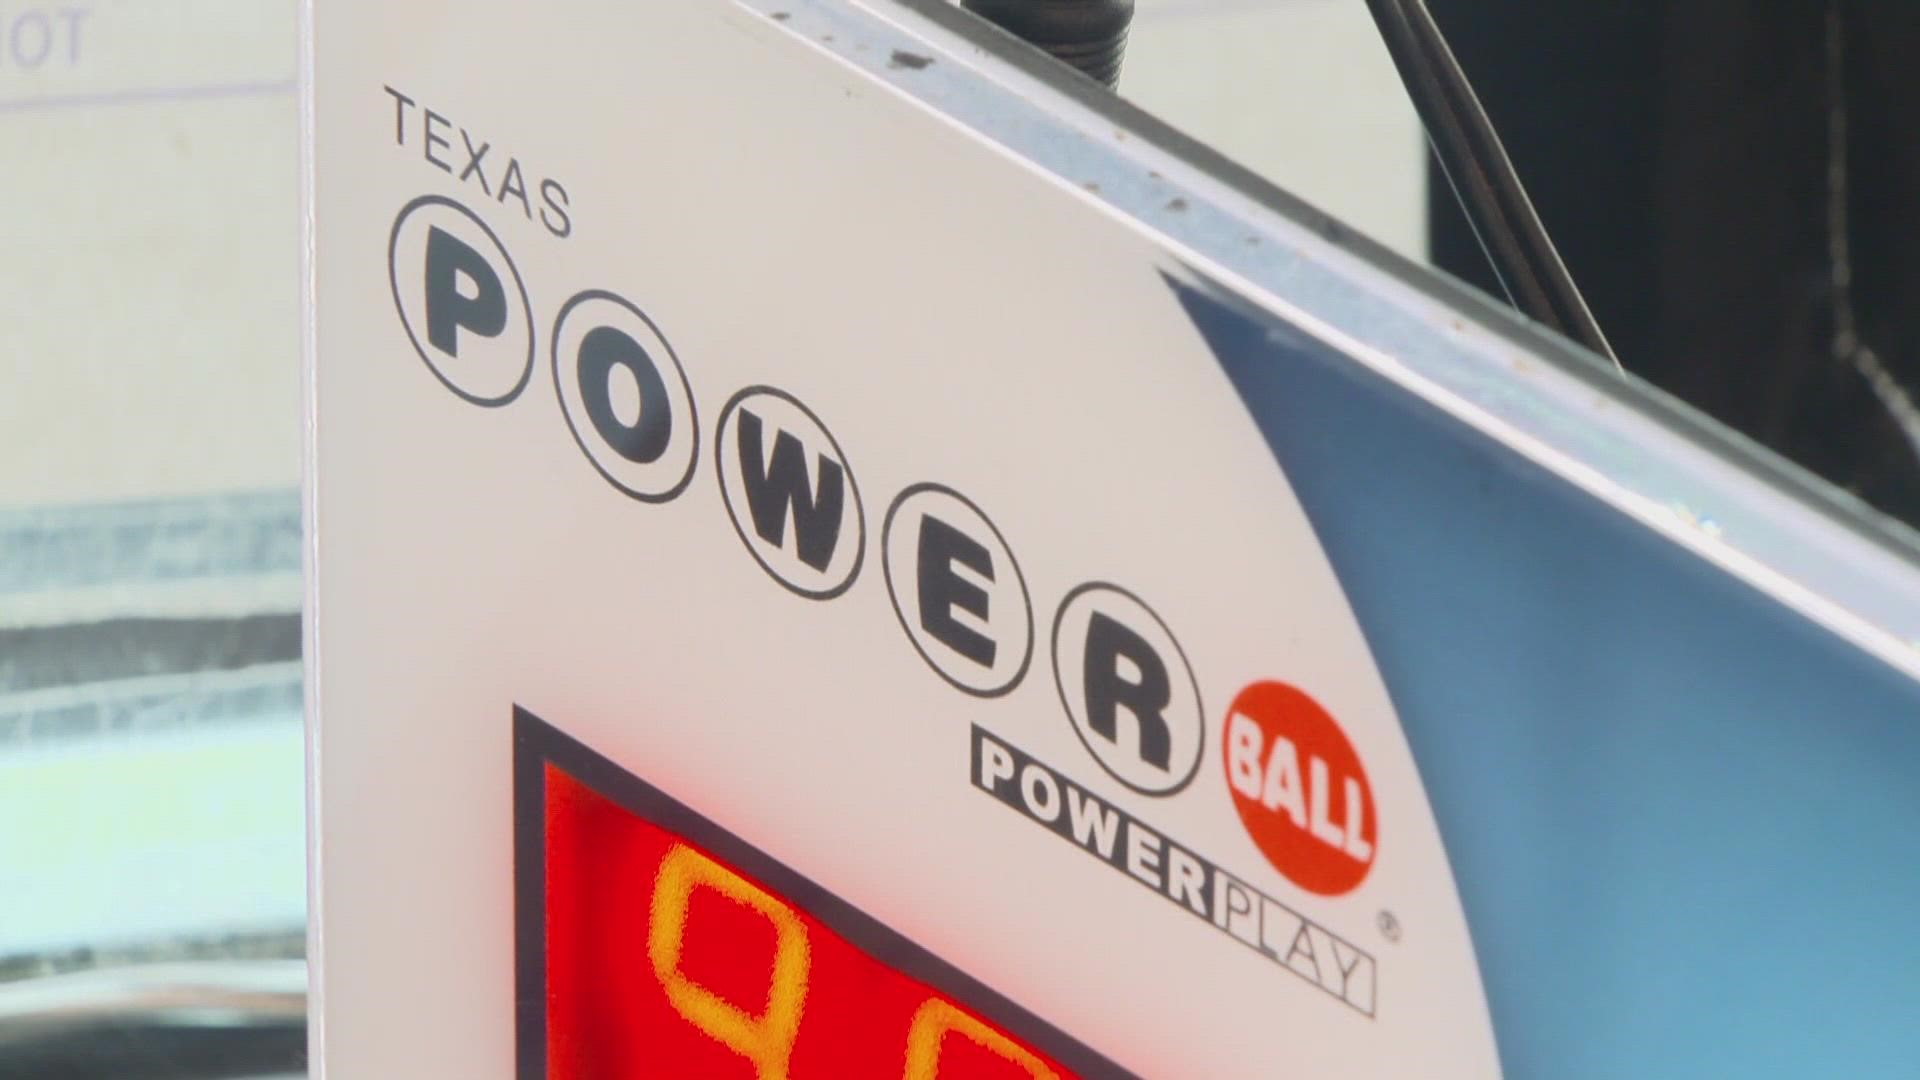 The odds of winning the Powerball jackpot are about one in 292 million.